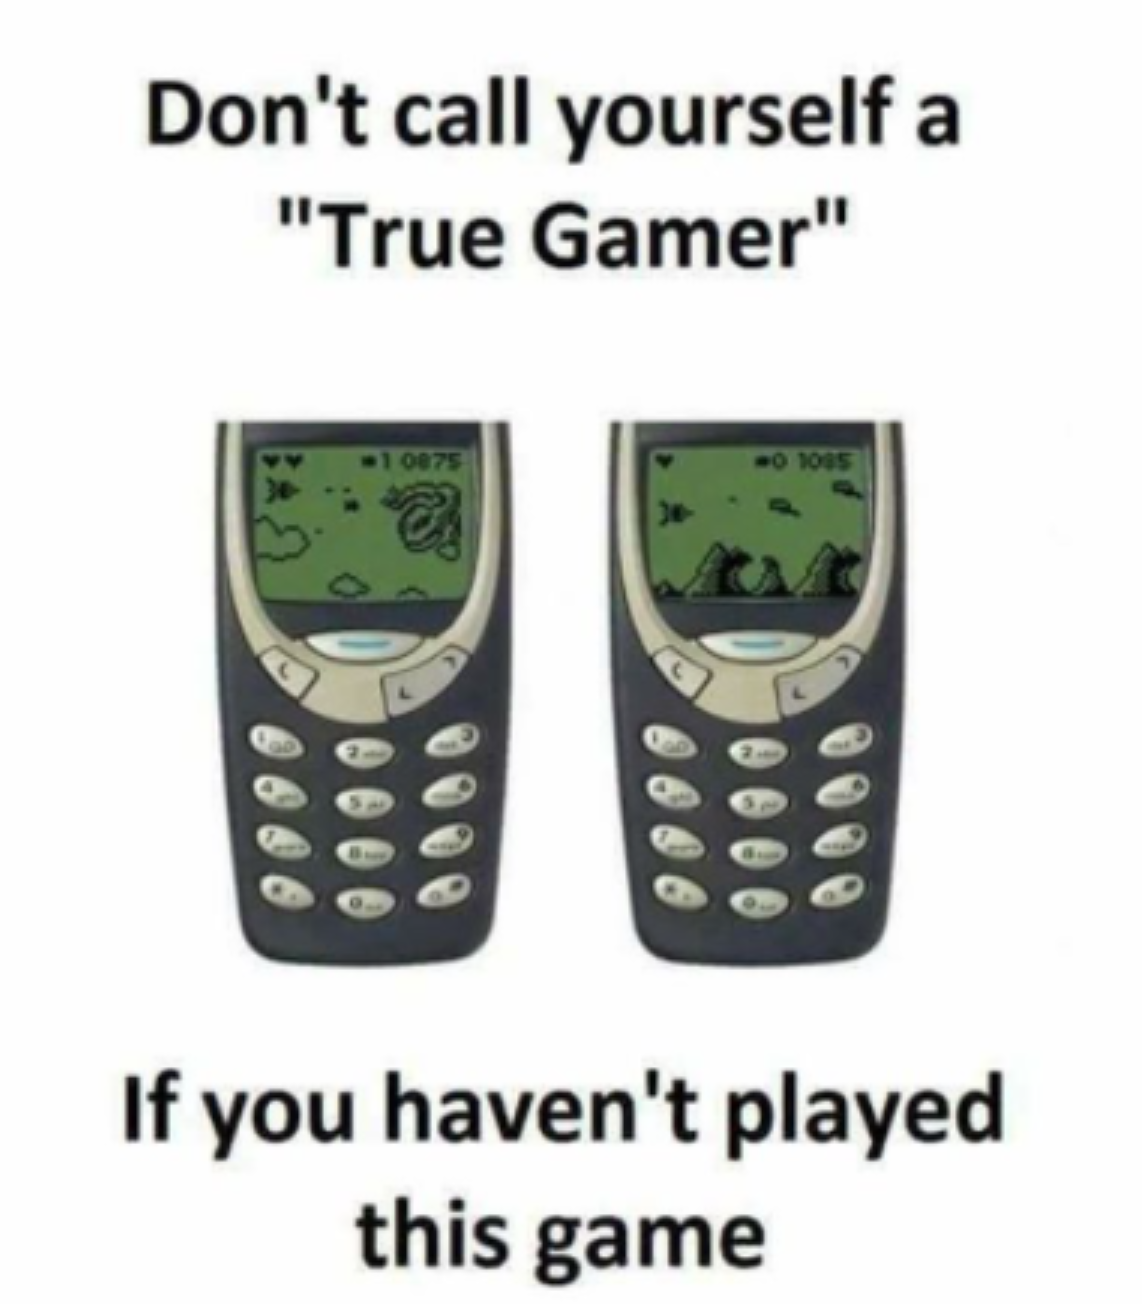 funny gaming memes --  true gamer memes - Don't call yourself a